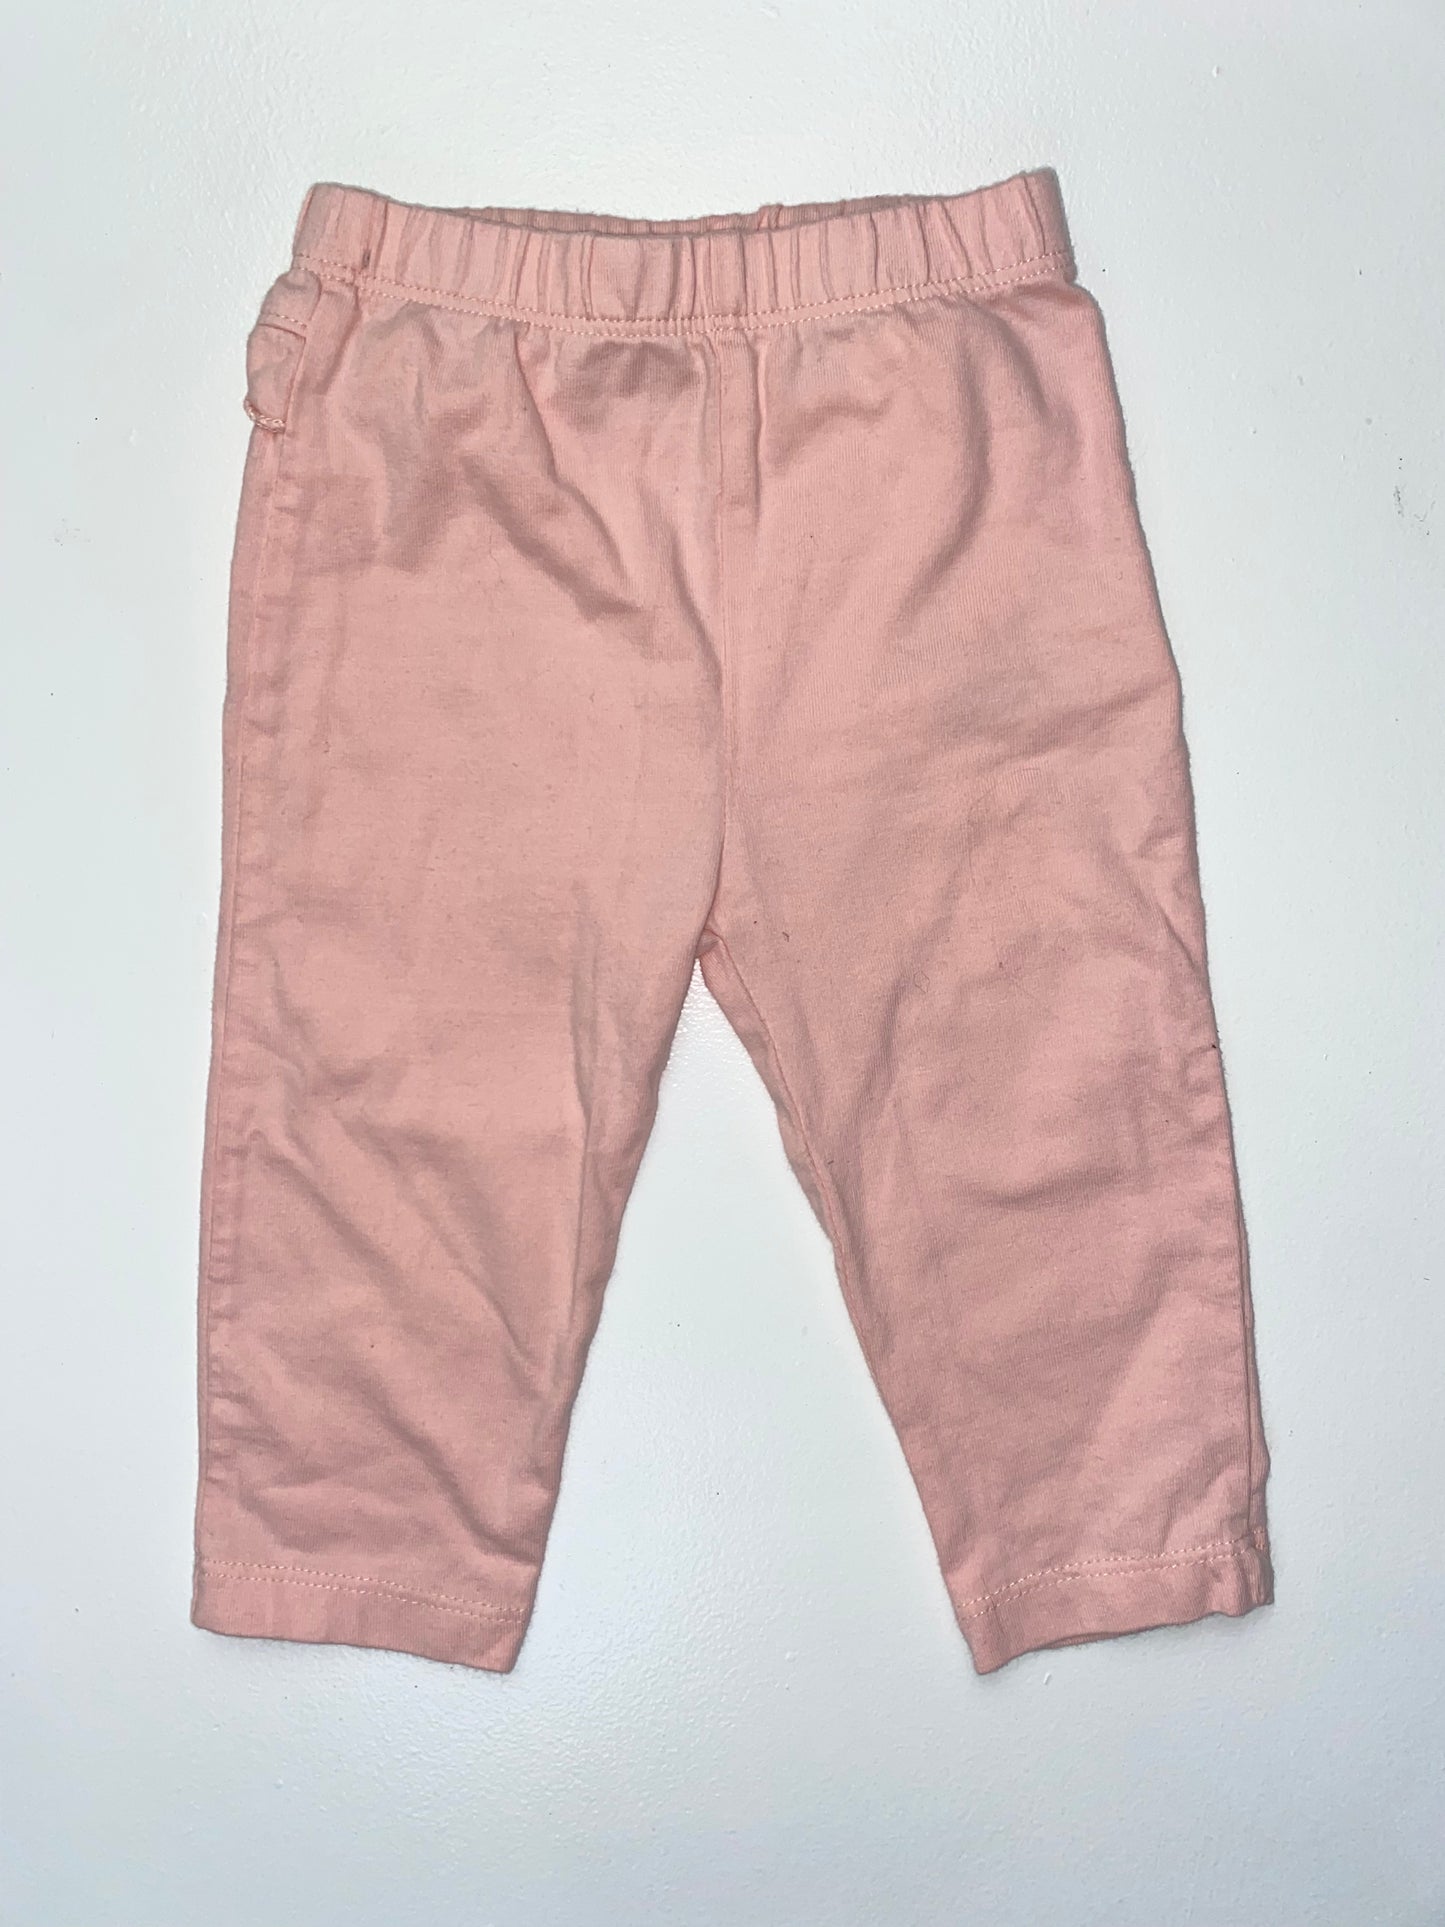 Bundles Pink Pull-On Pants with Frilly Bum 3-6M